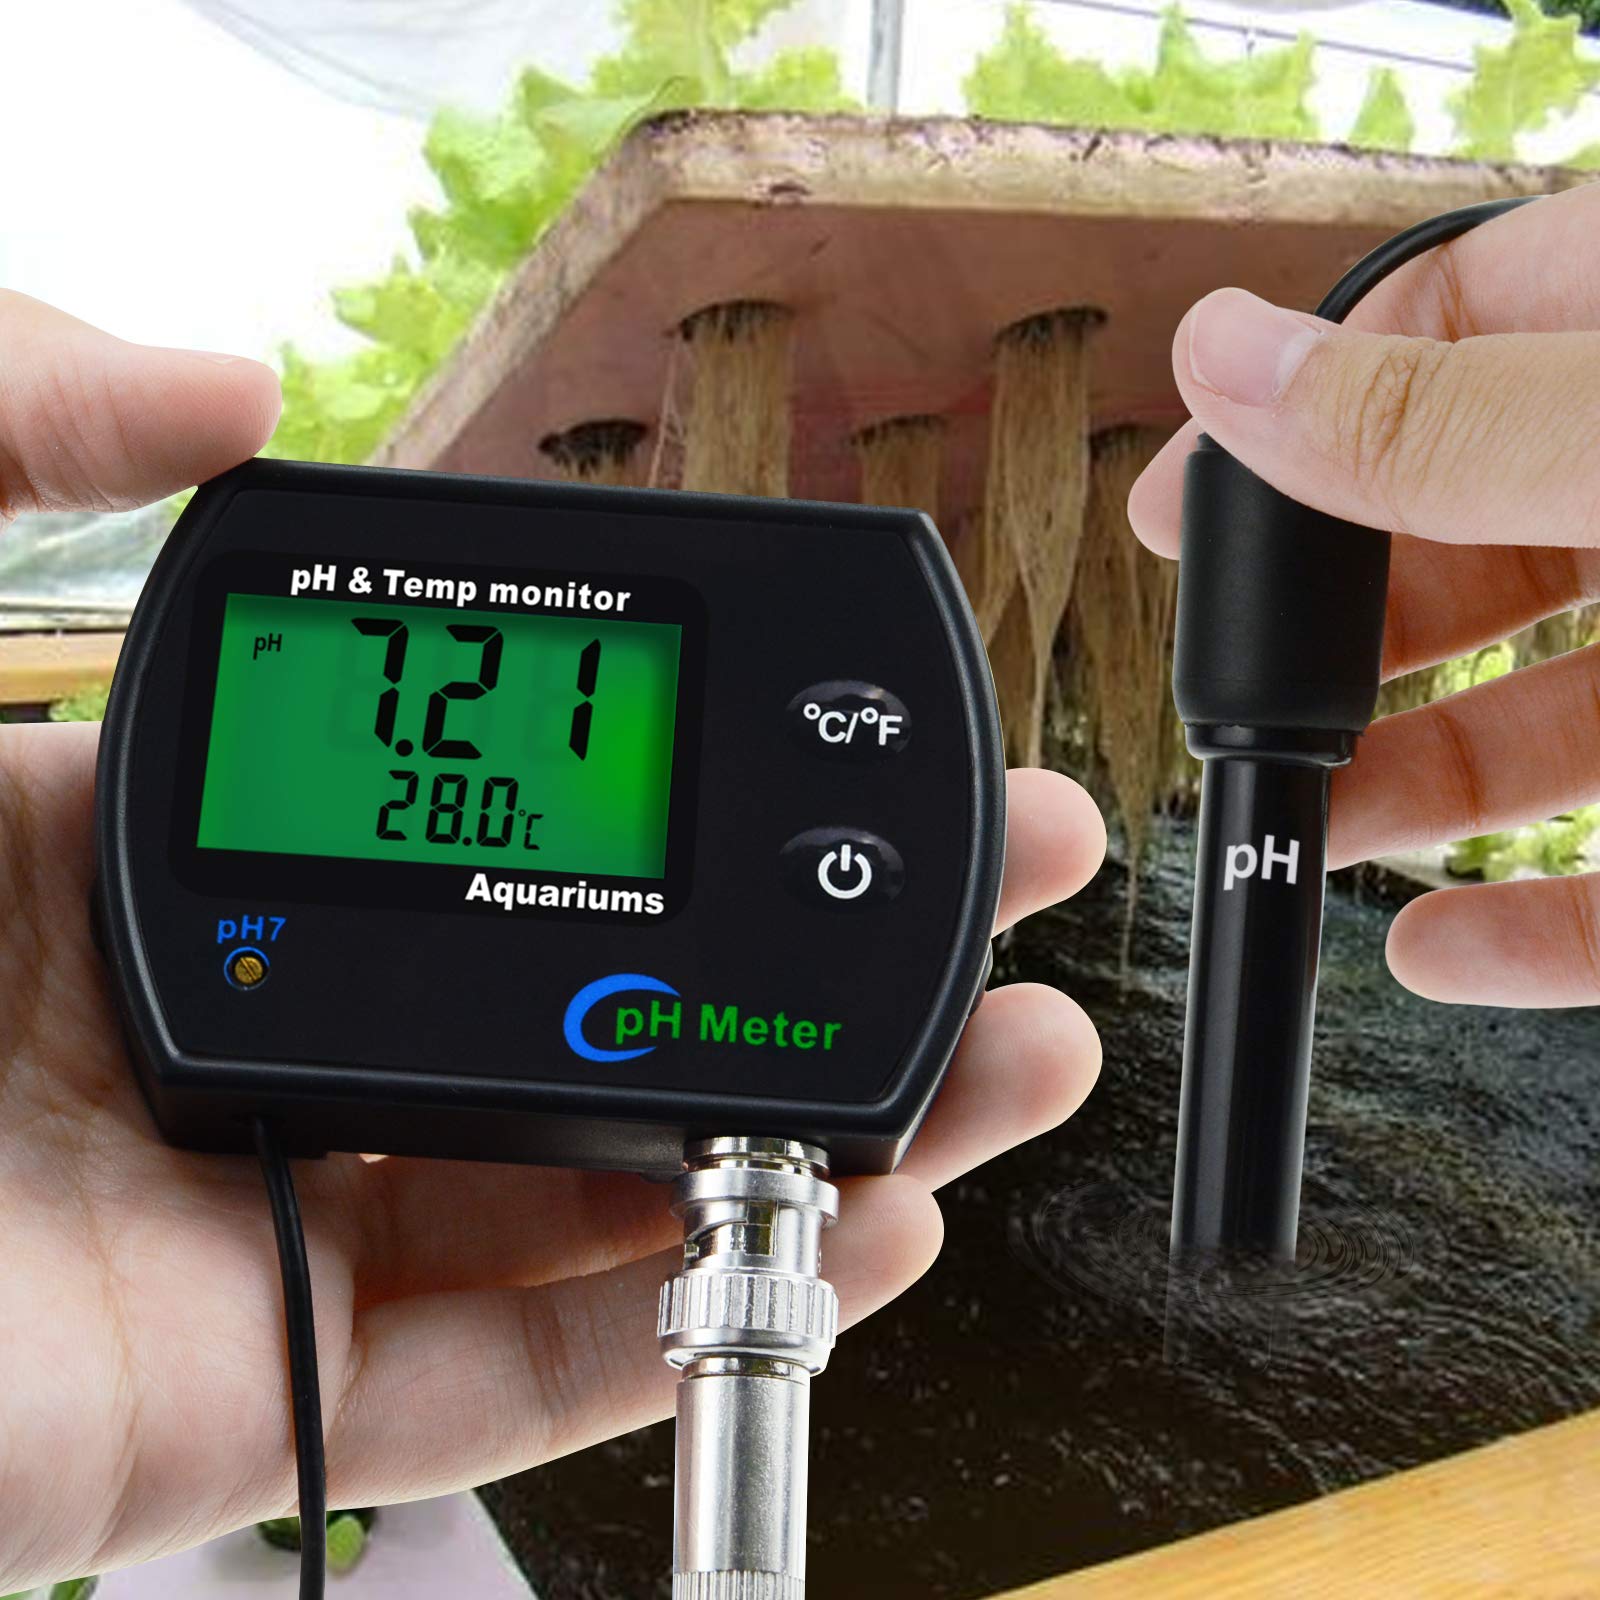 2-in-1 Combo pH & Temperature Meter Water Quality Tester Replaceable BNC pH Electrode for Aquariums Hydroponics Tanks Aquaculture Laboratory